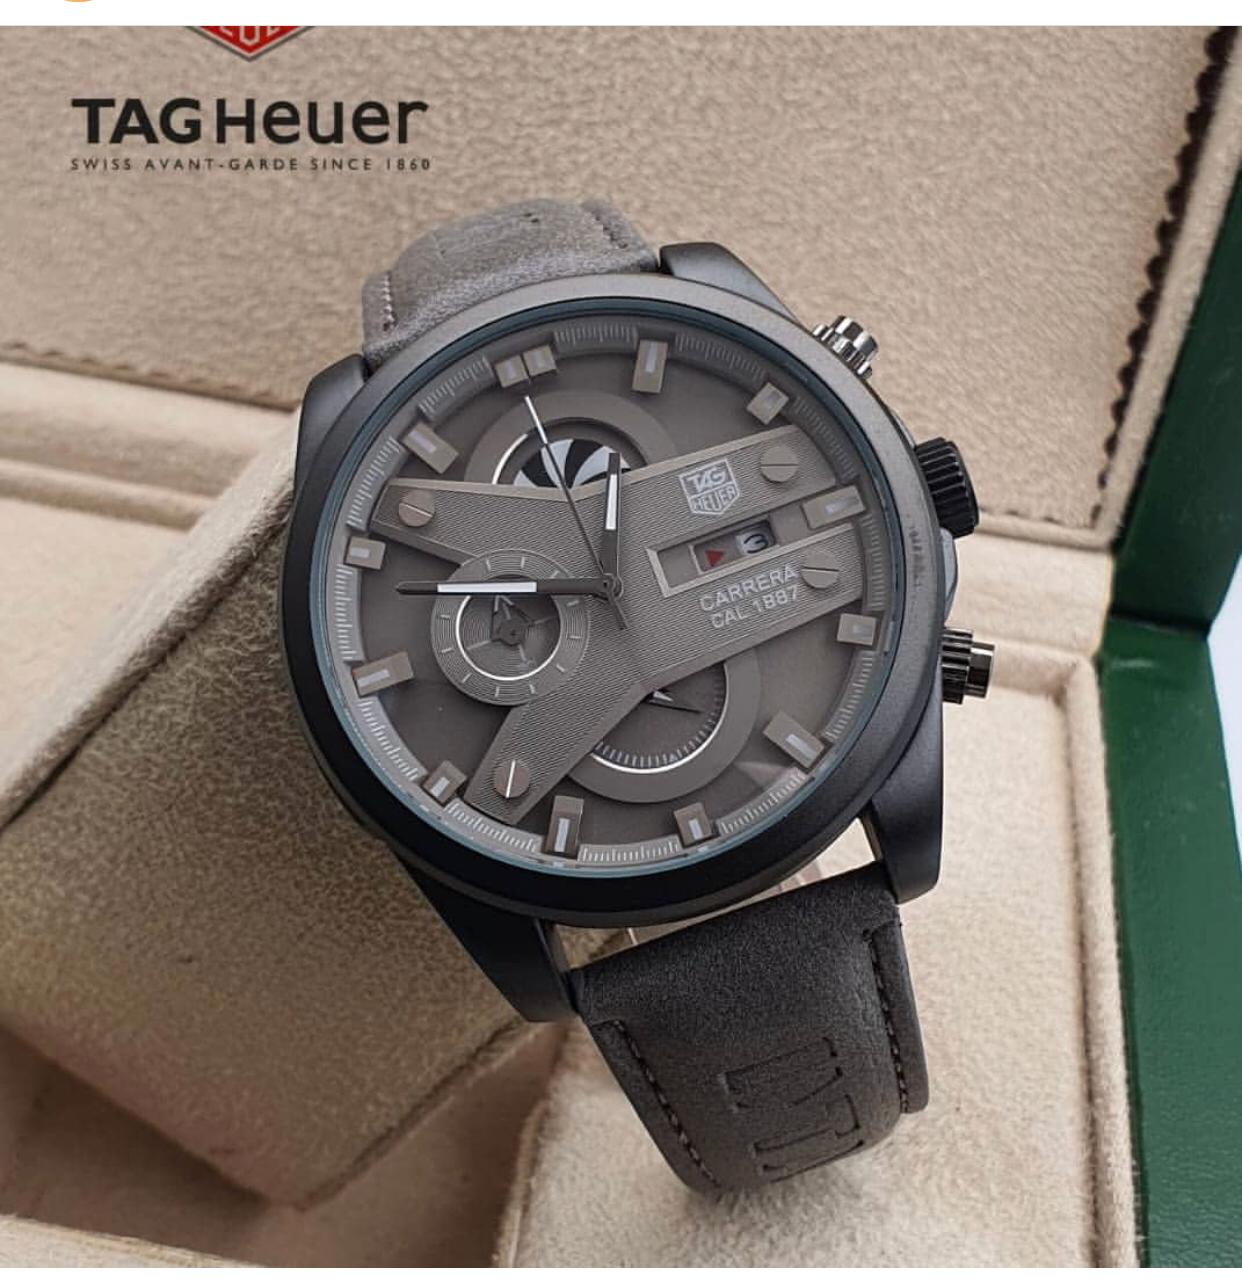 Tagheuer Grand Carriera TAG-6910-CR7 Grey Chronograph Multi Dial With Black Metal Case & Leather Strap Men's Watch - Best Formal Look Watch